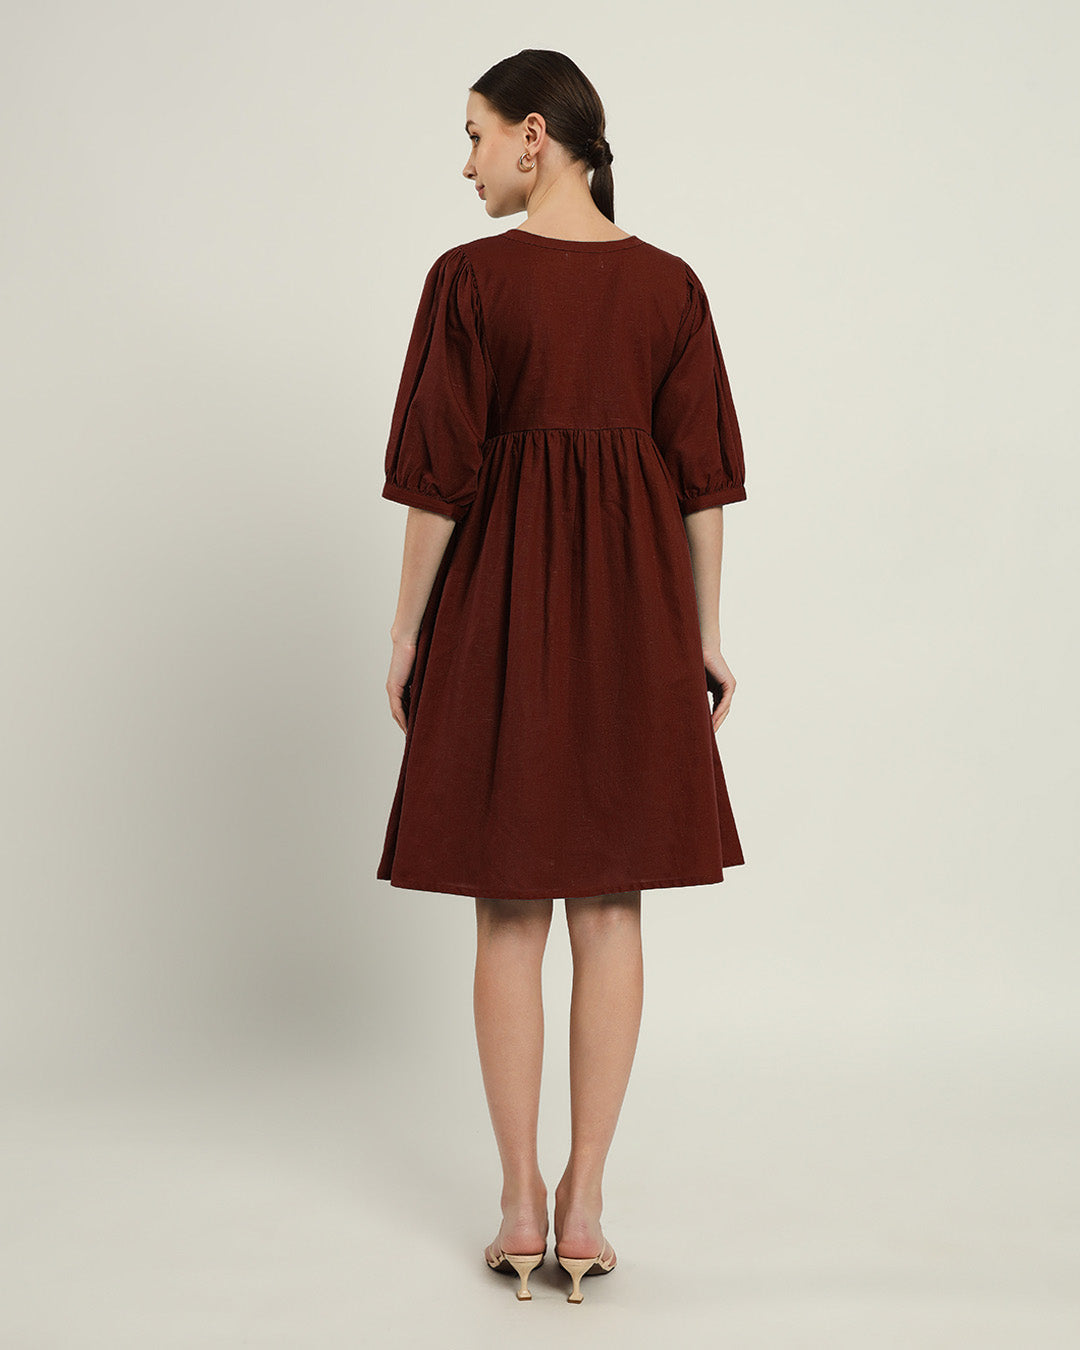 The Aira Rouge Dress